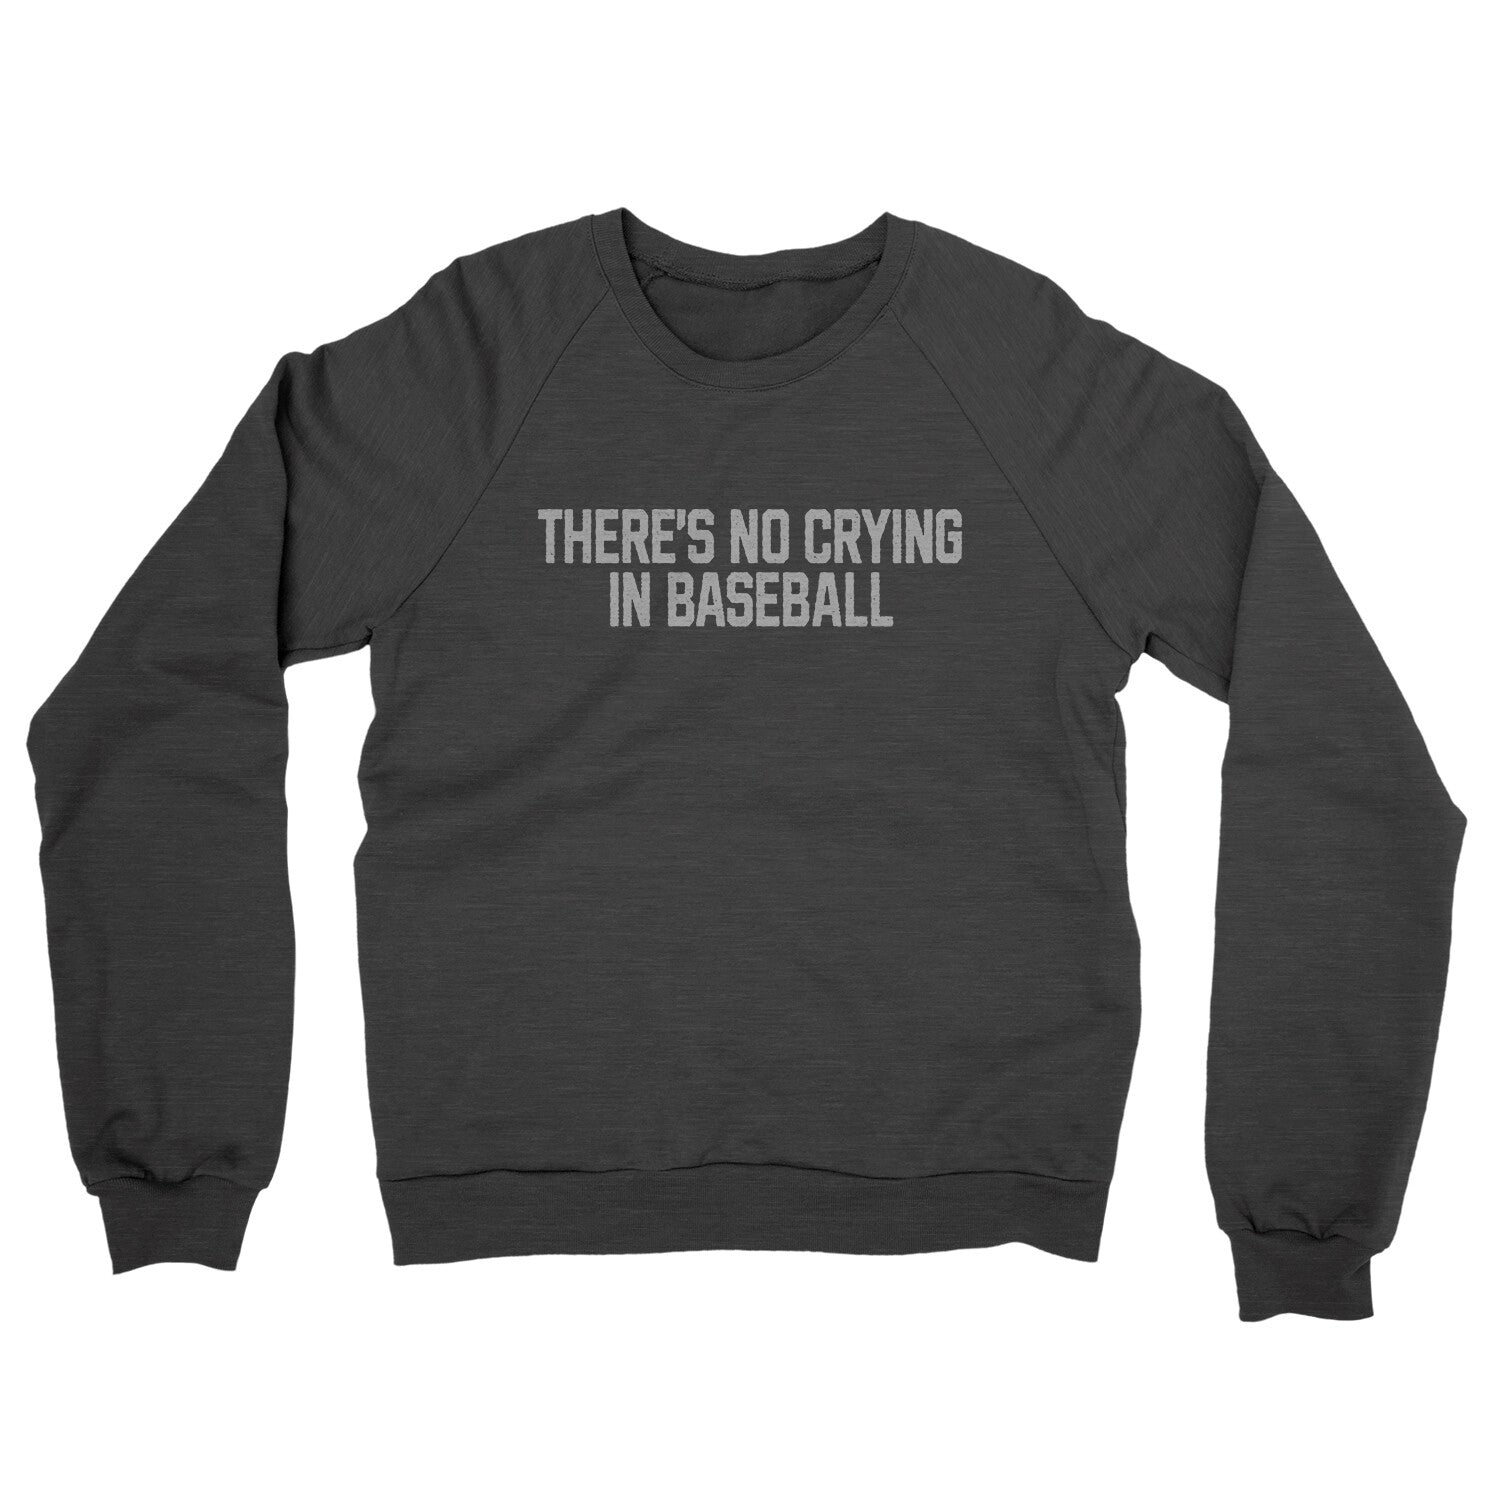 There's No Crying in Baseball in Charcoal Heather Color